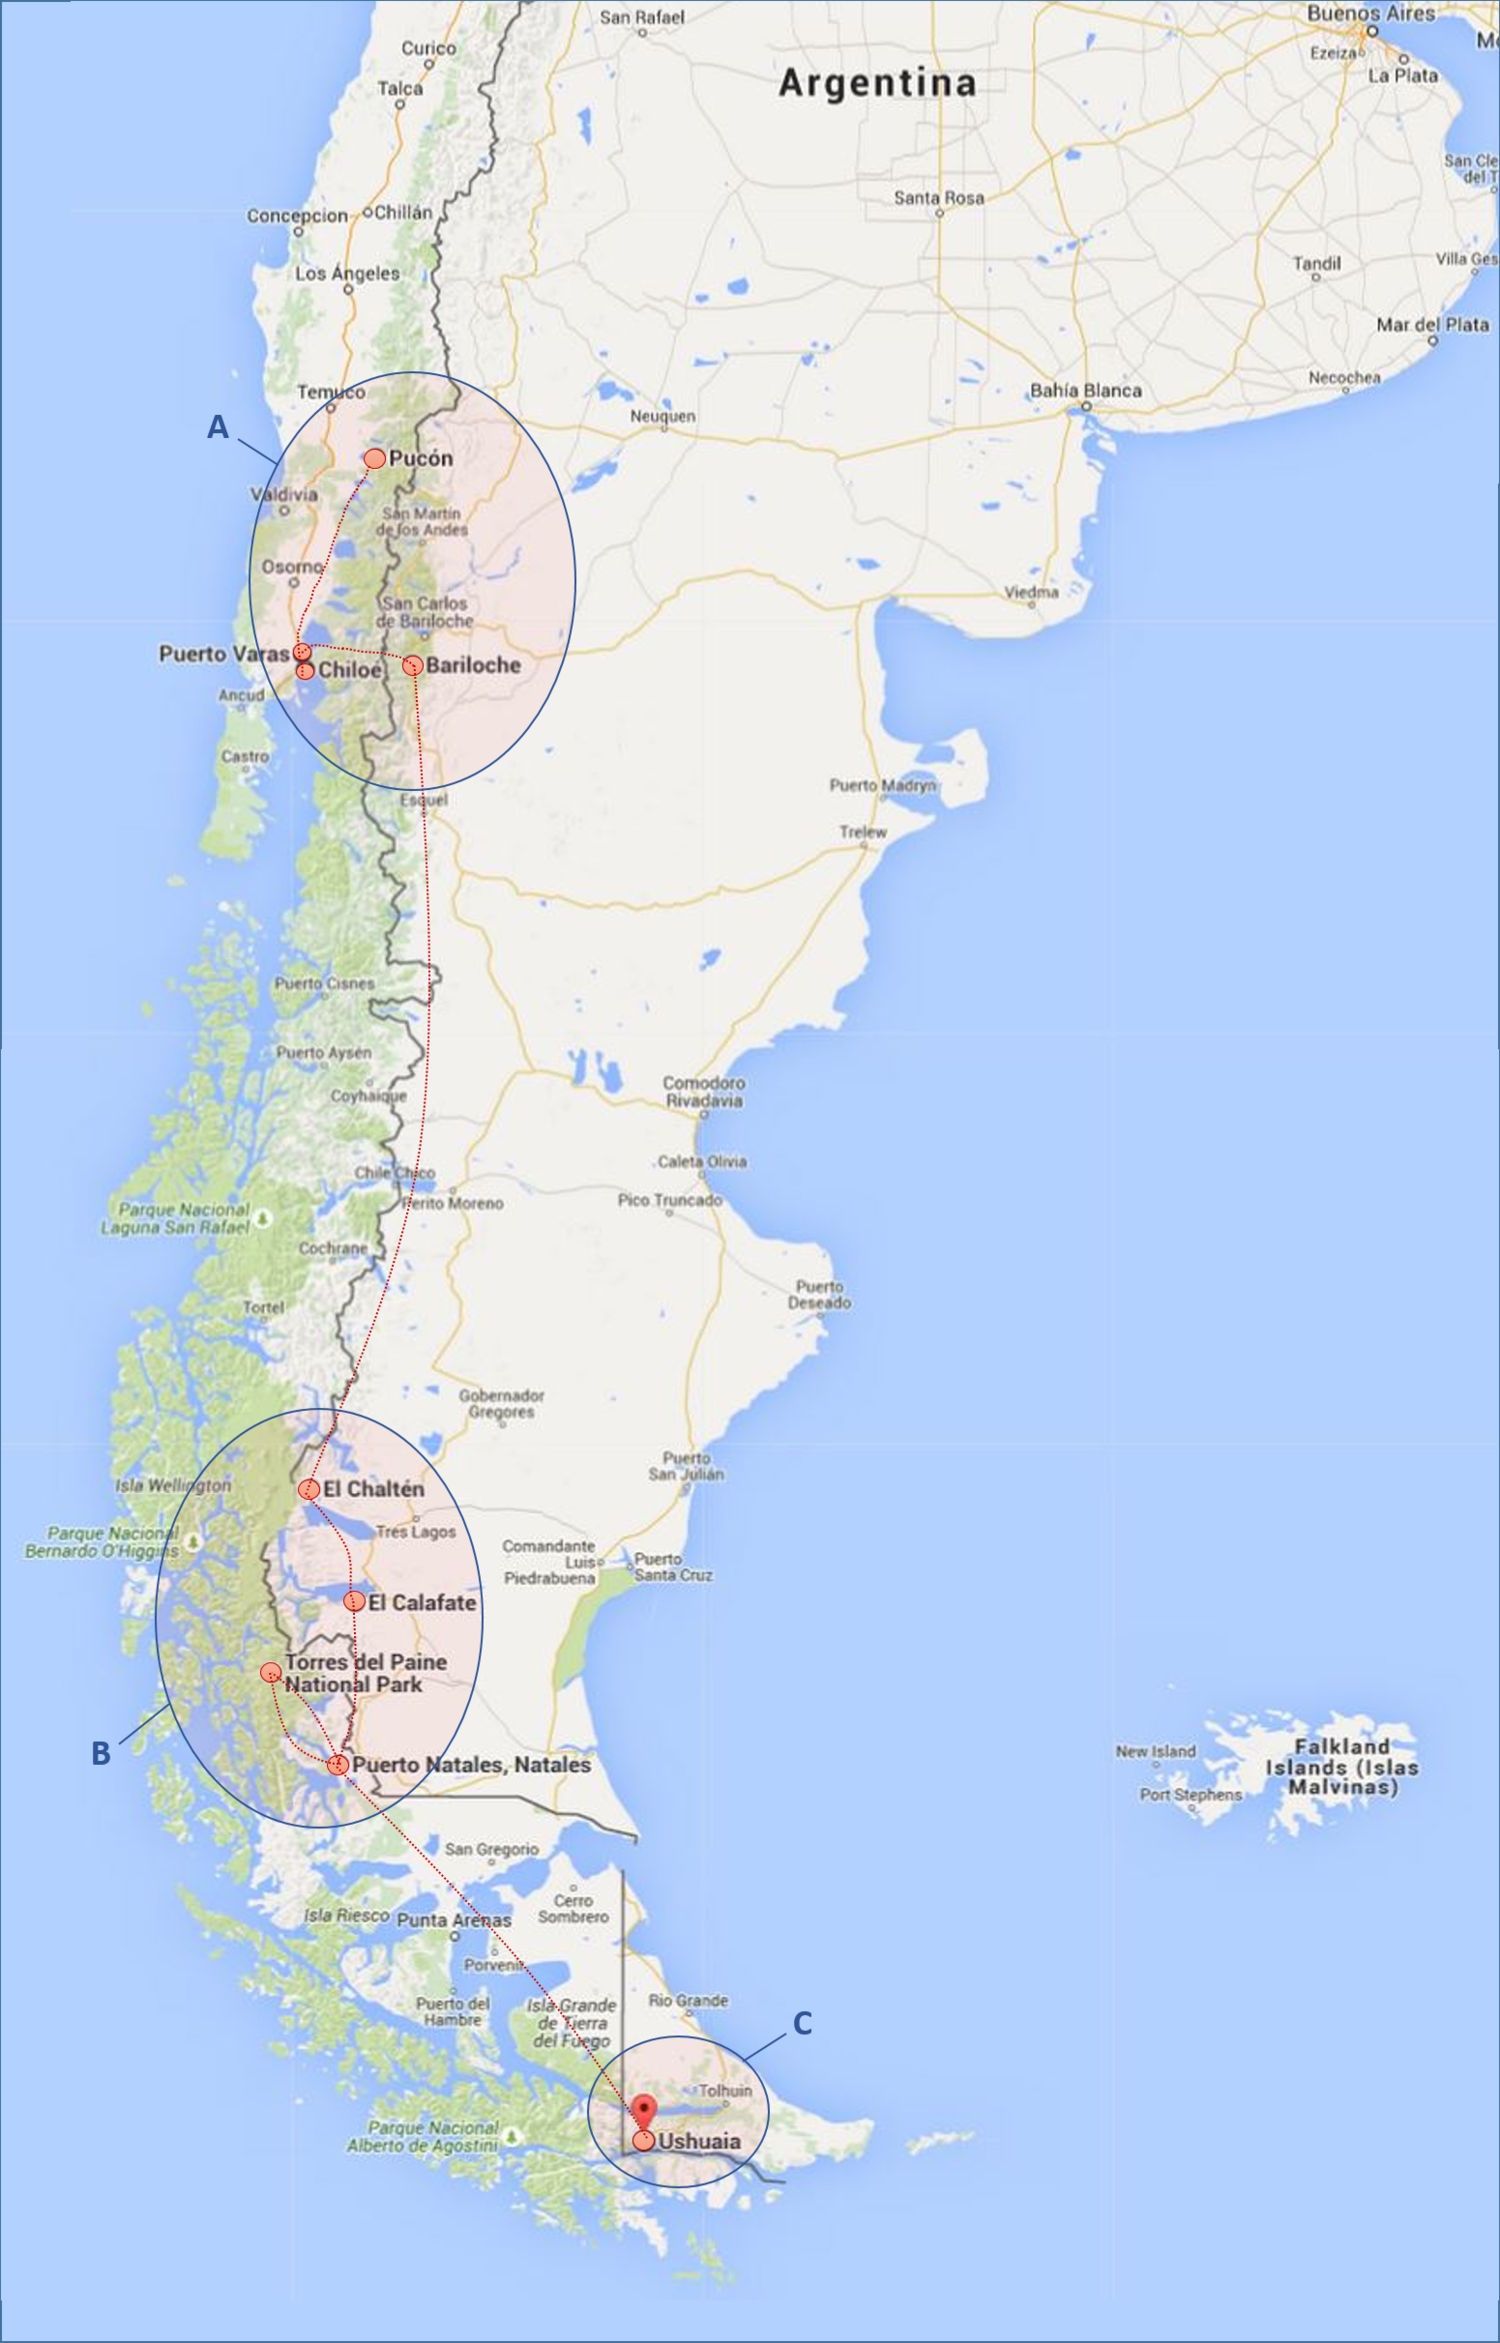 Planning and Budgeting for Backpacking Through Patagonia Travel Blog and World Class Photography - Blog - the Map